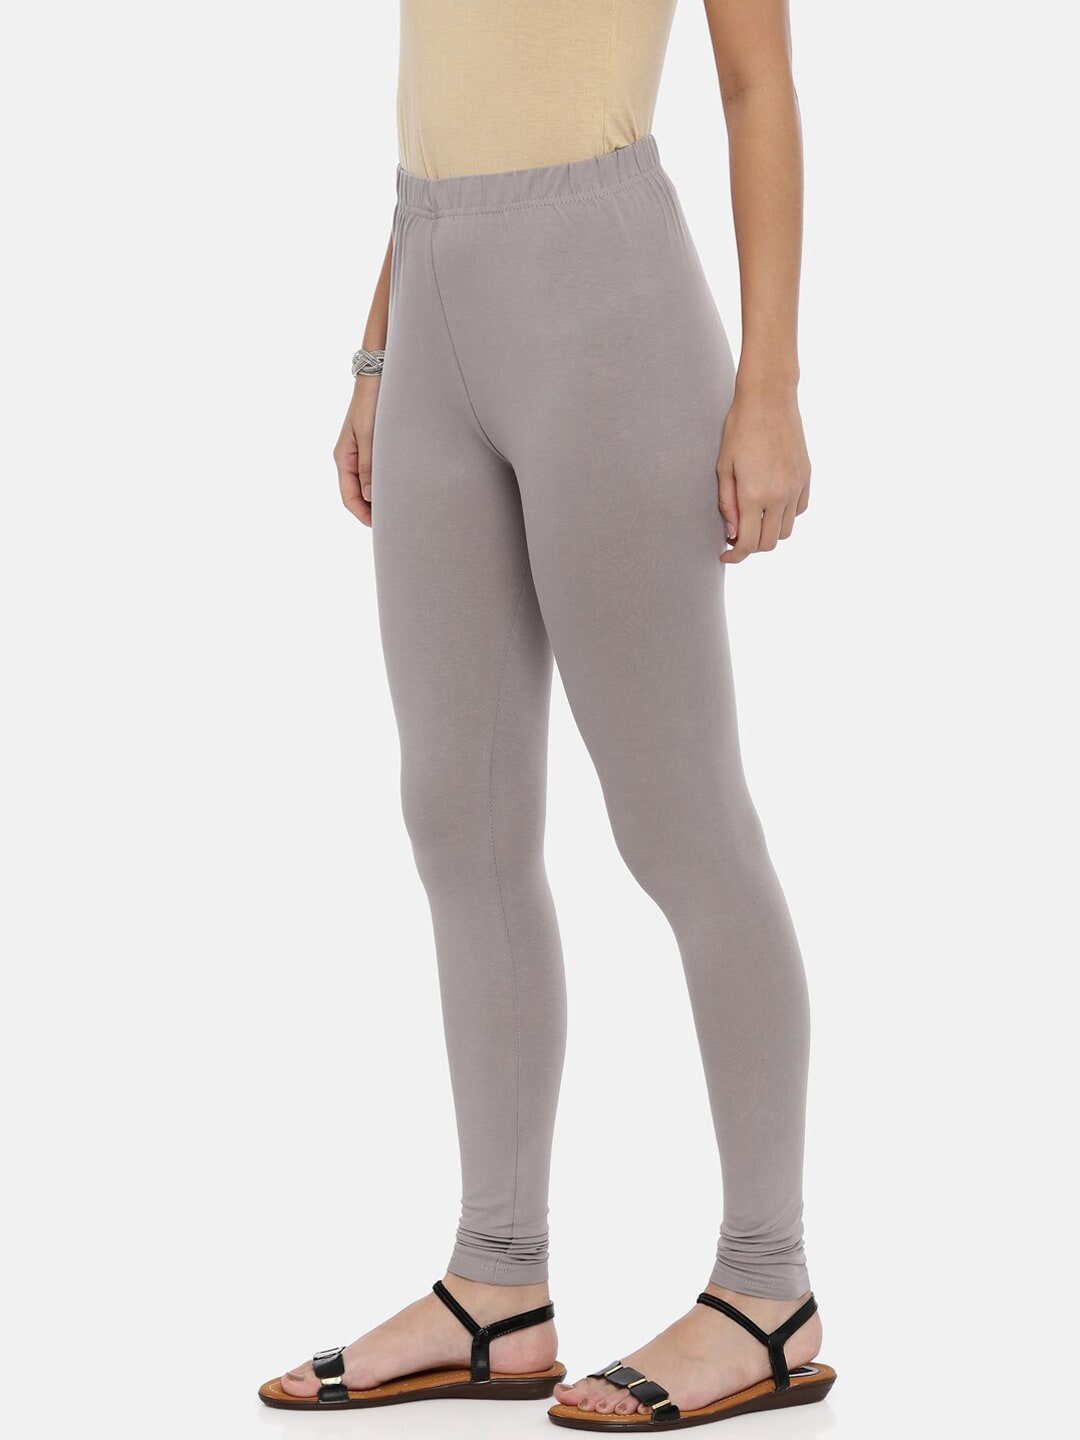 Grey Colour Gray Plain Legging For Ladies Comfortable Fir And High Quality  Material at Best Price in Balaghat | Sharan Traders